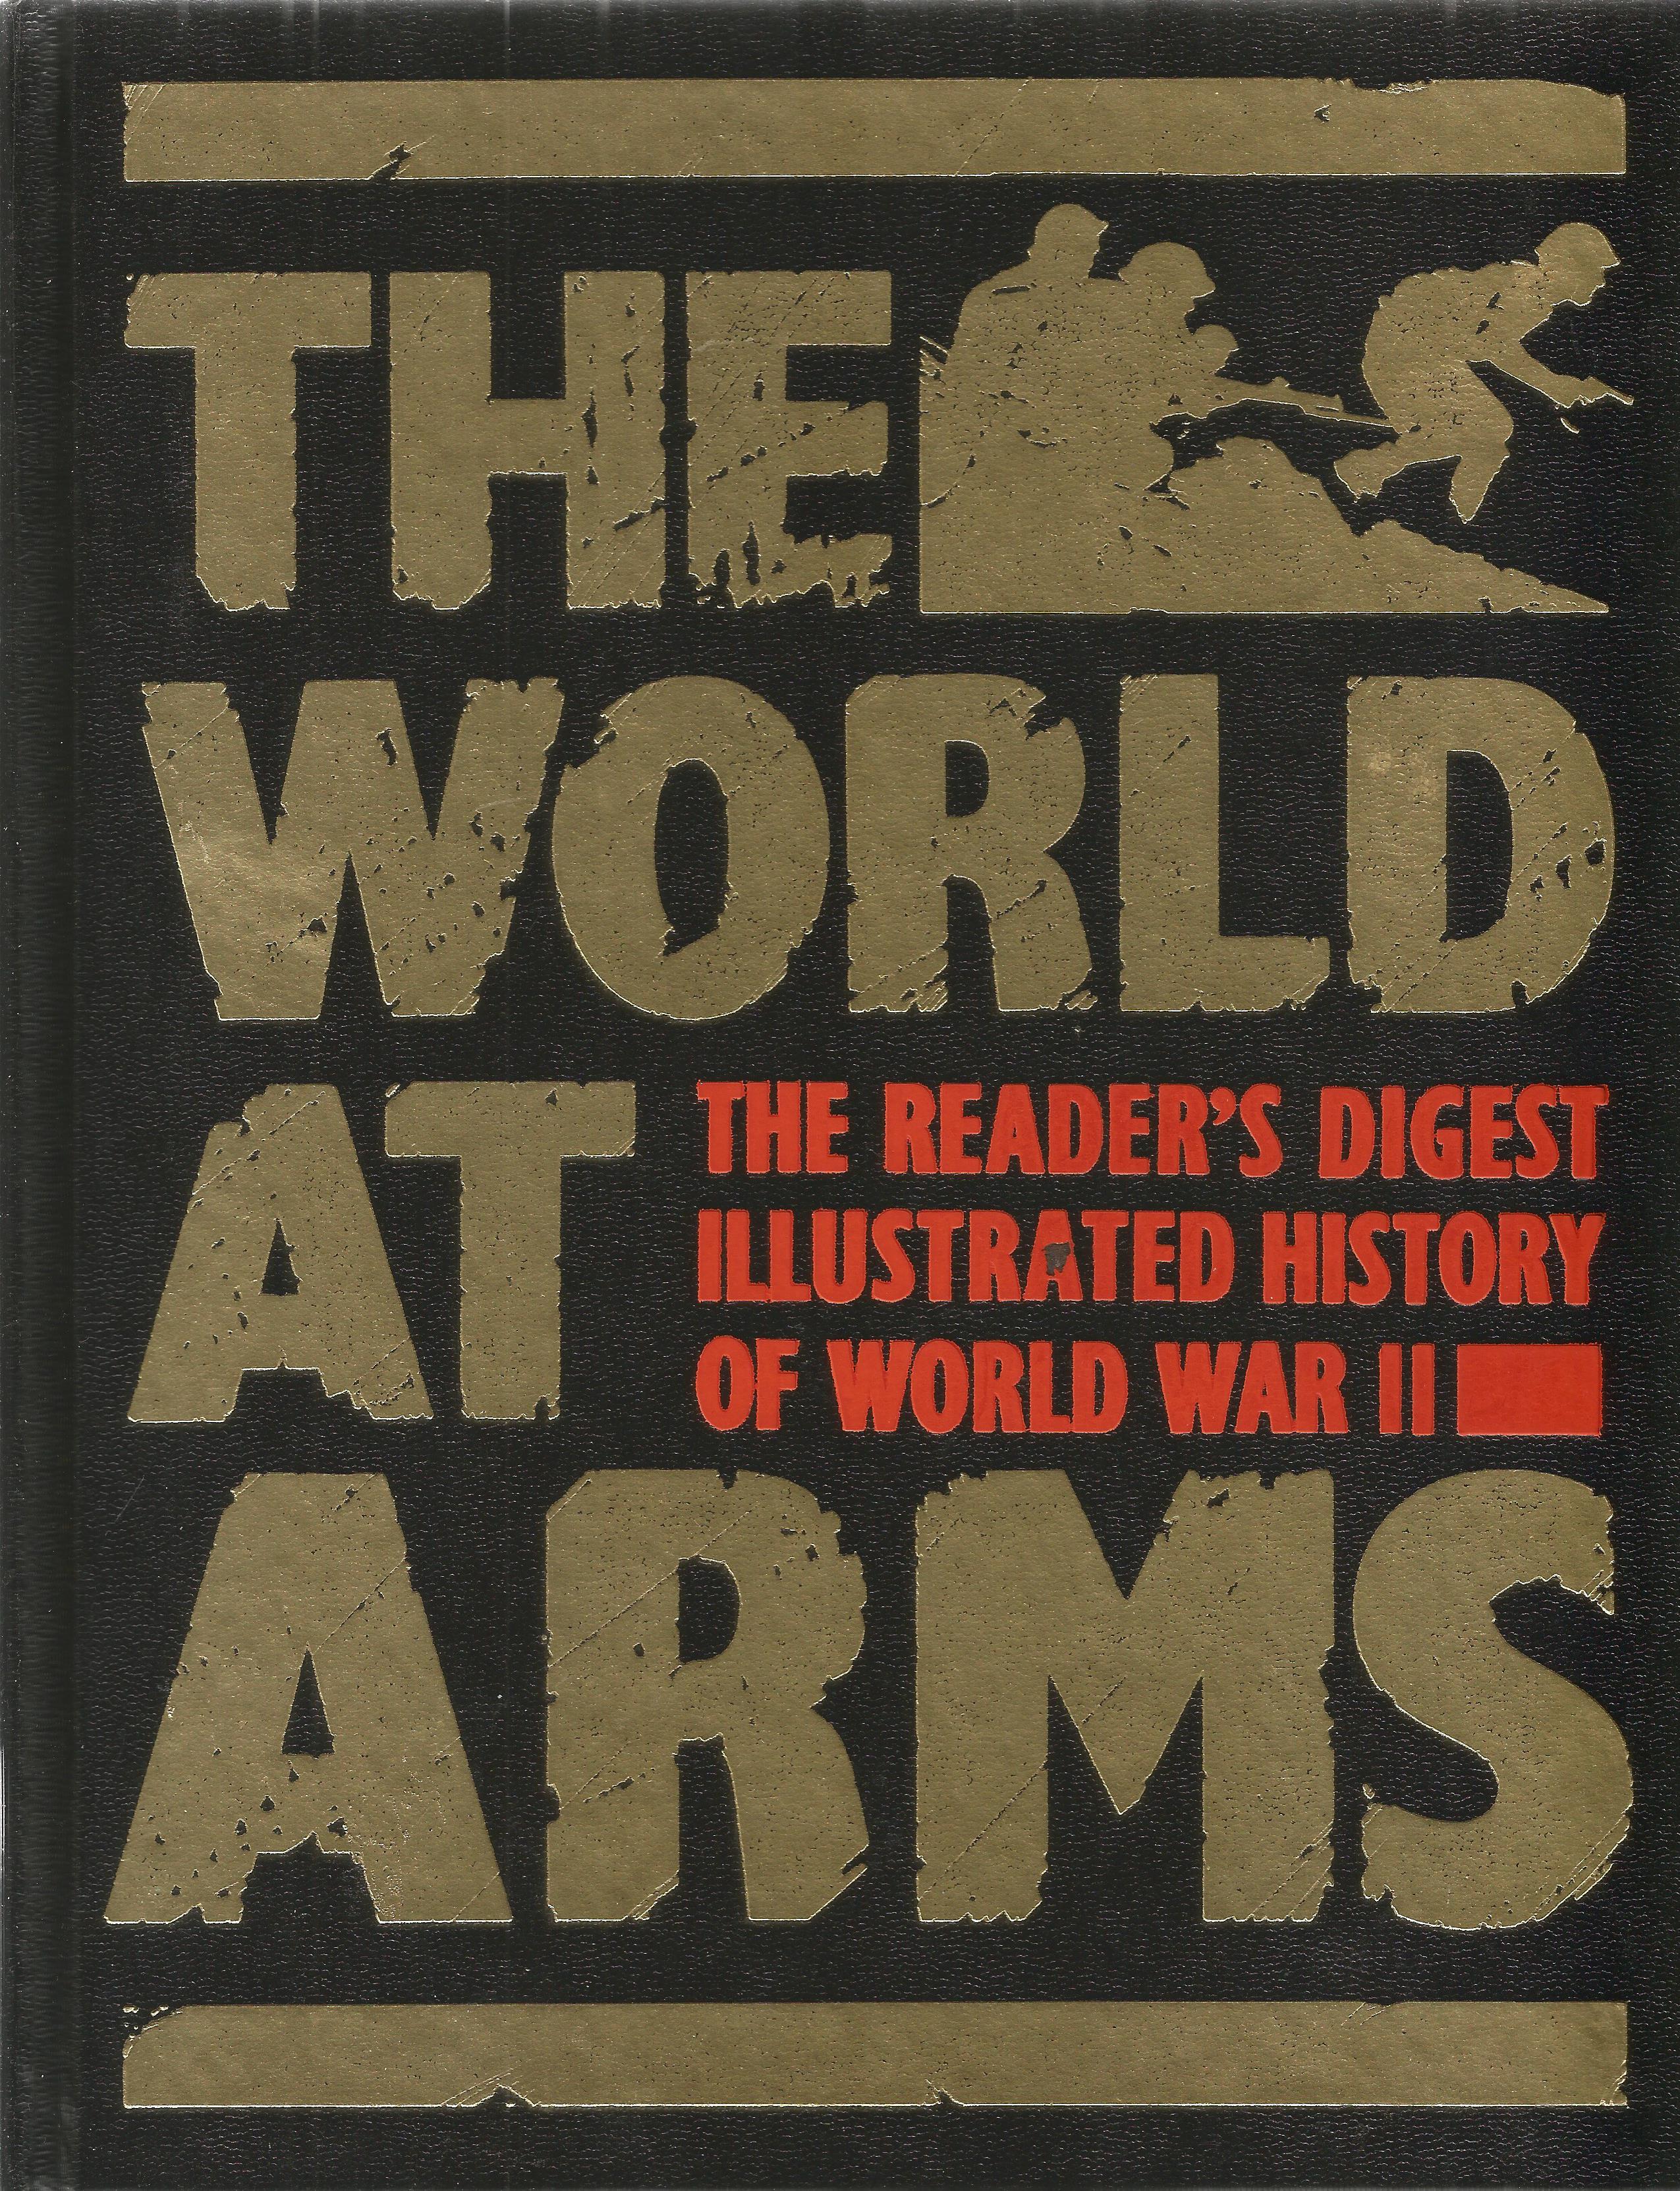 Reader's Digest The World At Arms Illustrated History of World War II 1989 First Edition Hardback